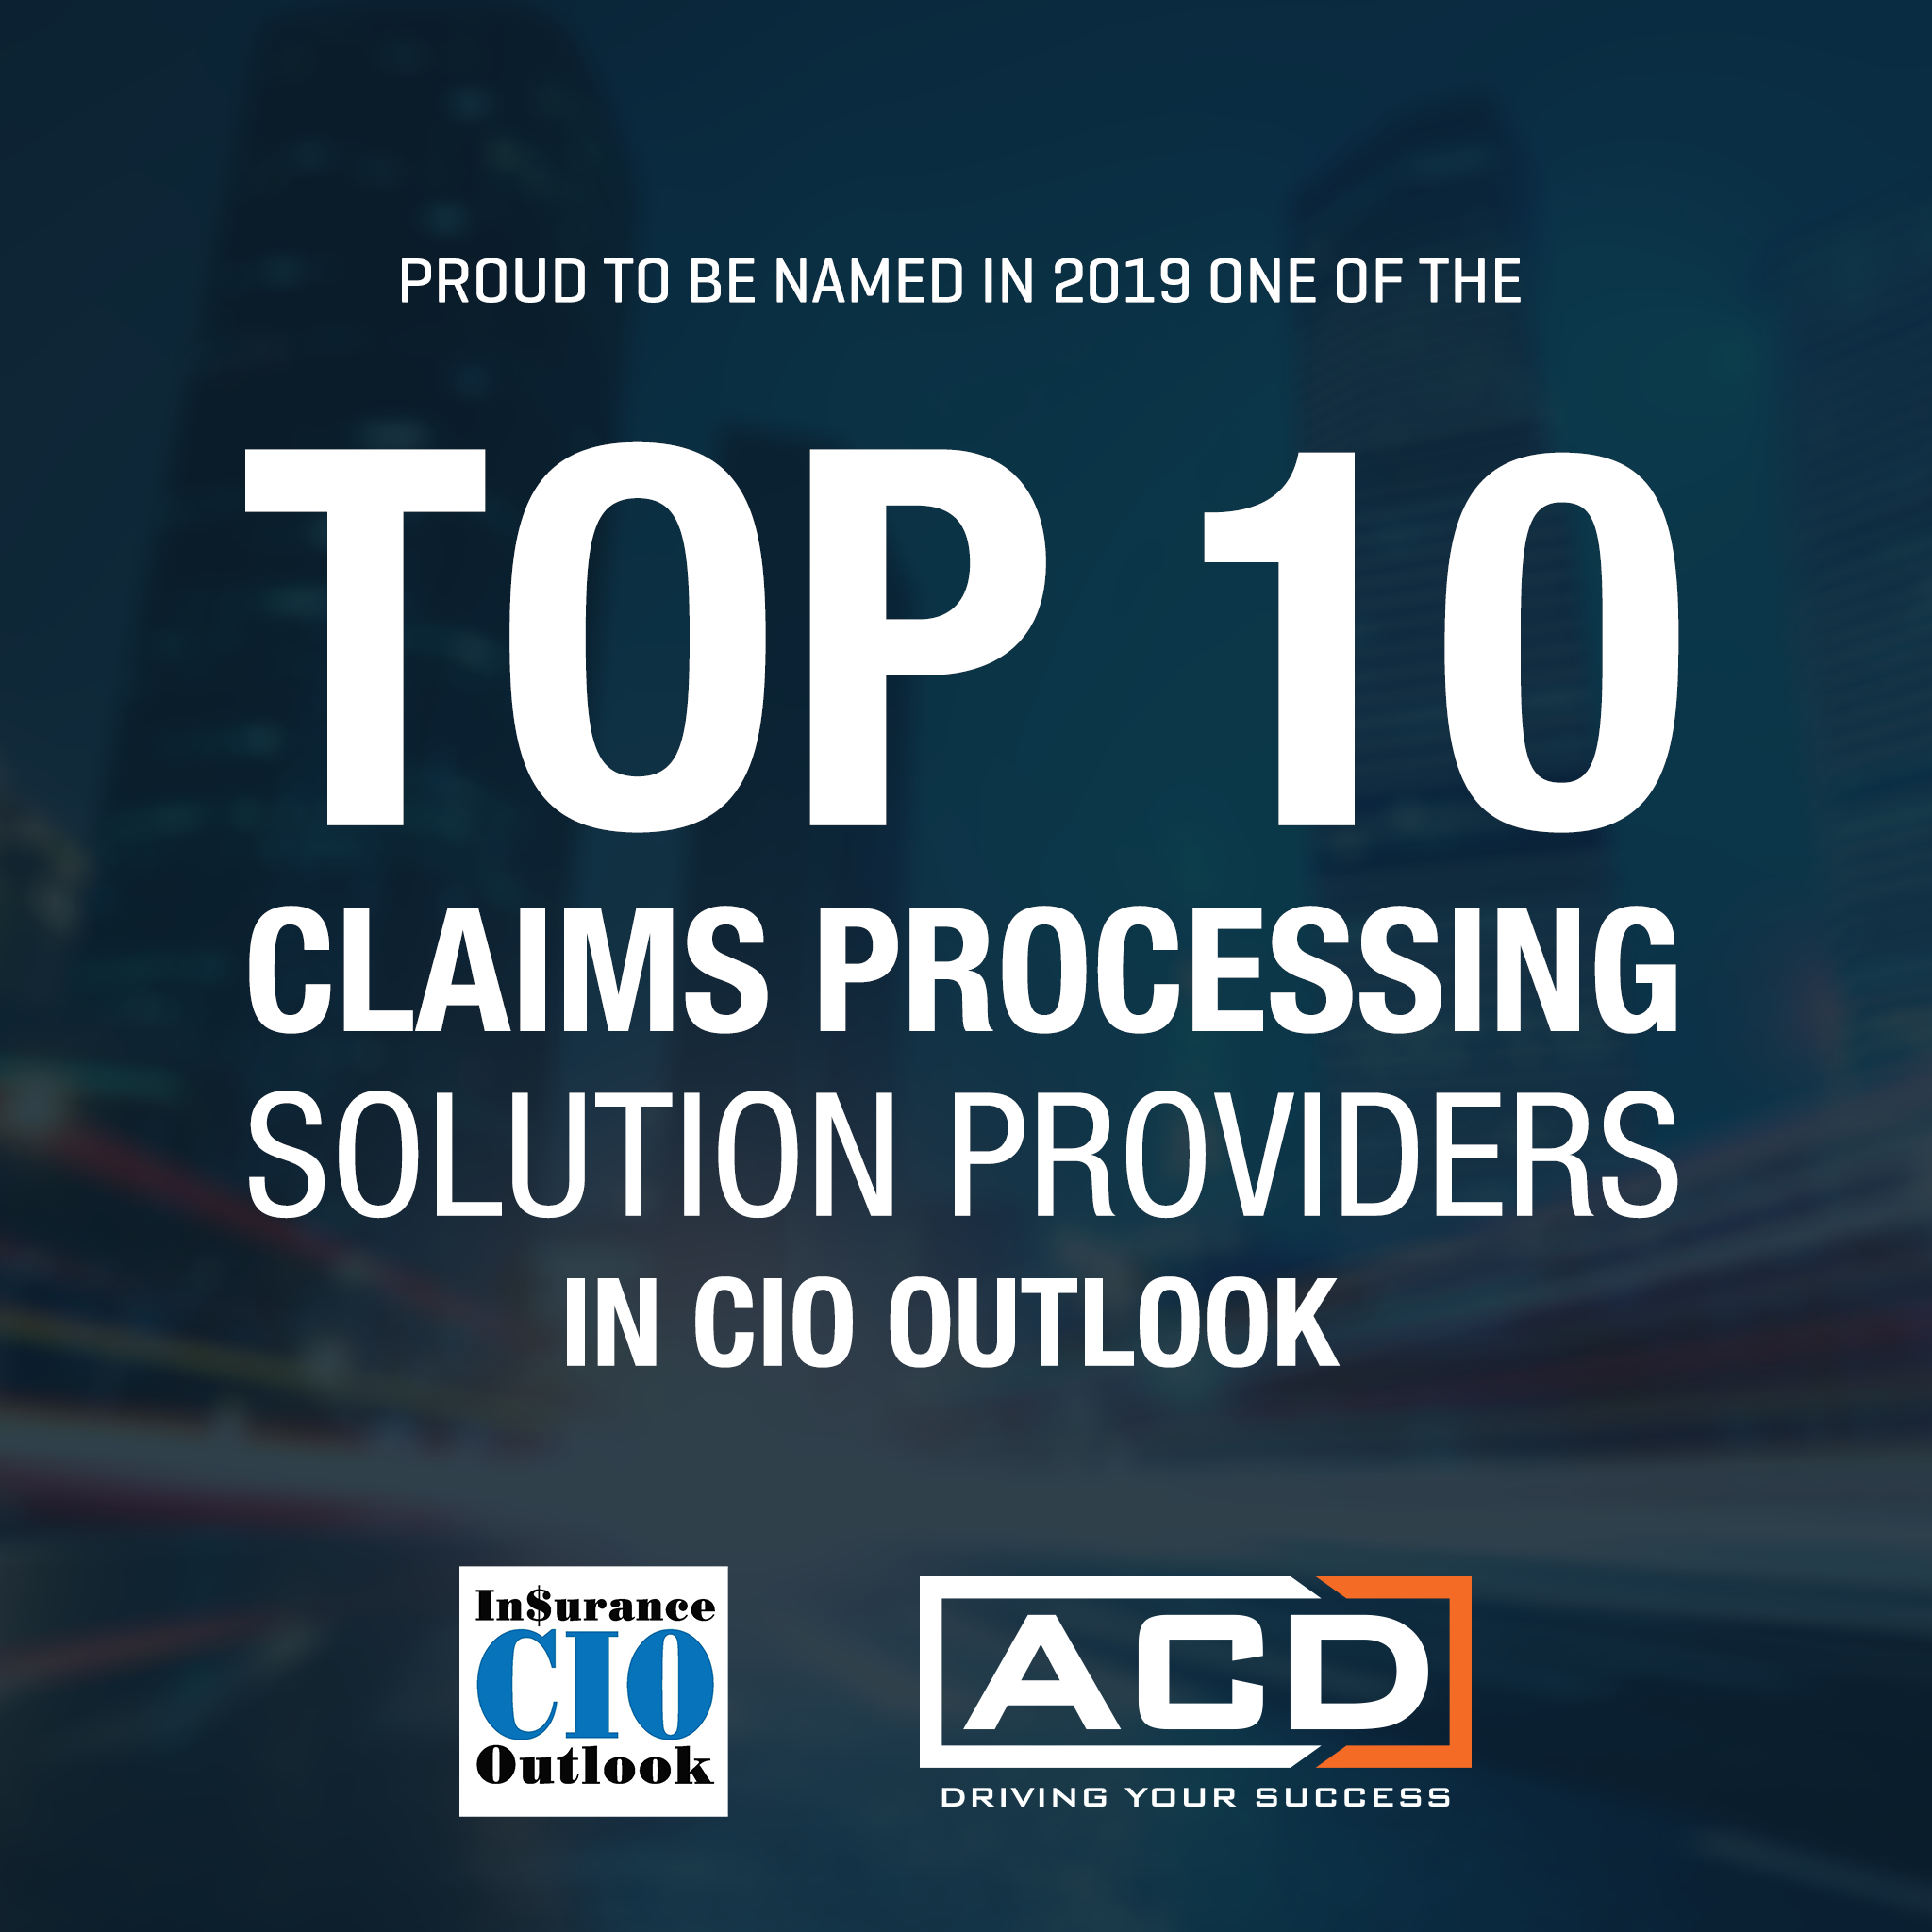 ACD Named Insurance CIO Outlook's Top 10 Claims Processing Companies in 2019